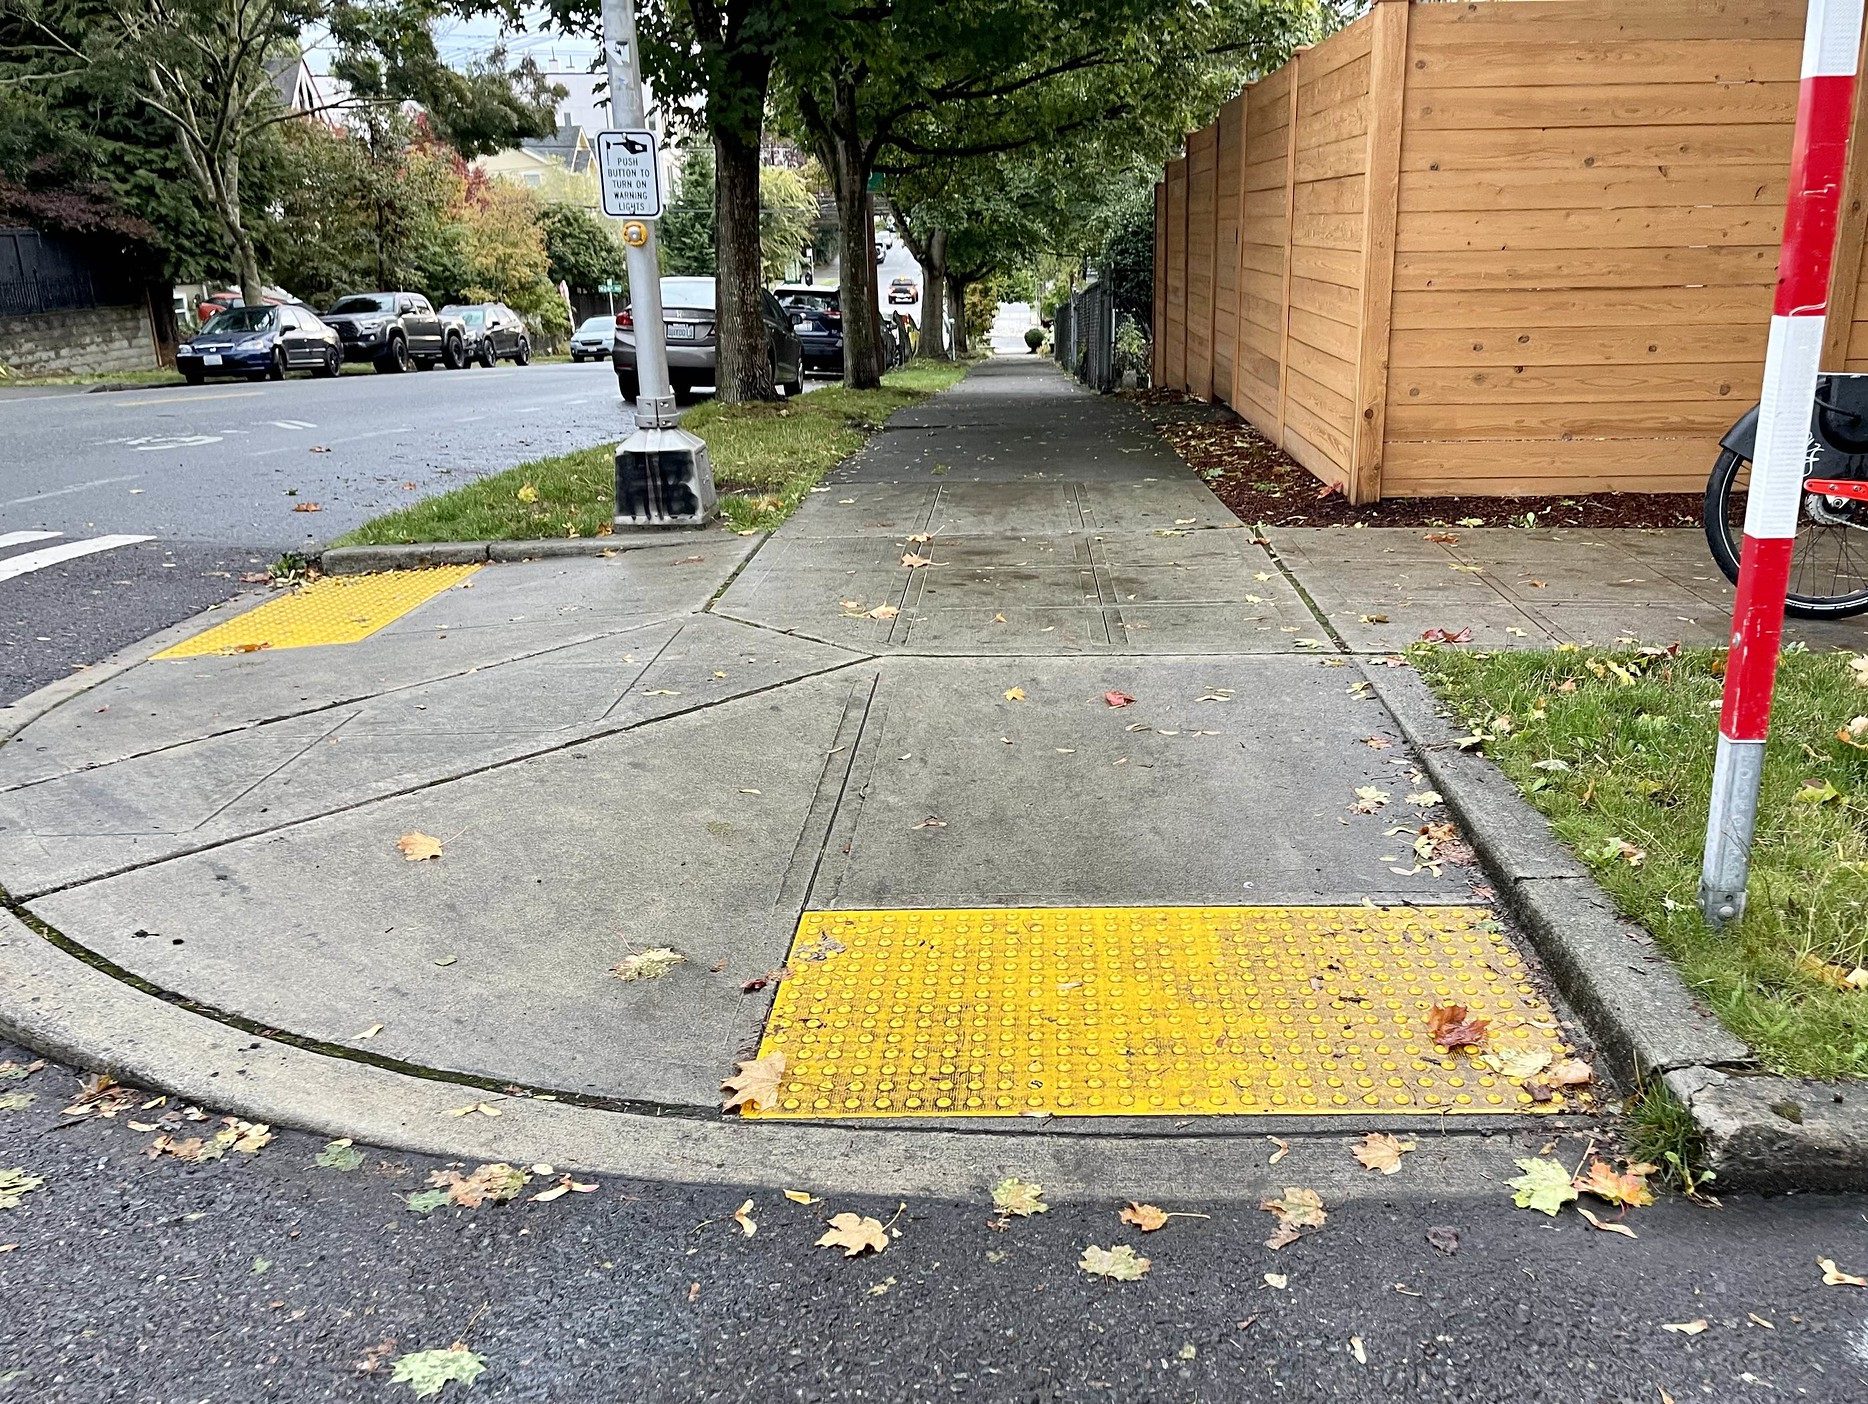 Example of a newly installed curb ramp in Seattle’s Central District that meets accessibility standards established by the Americans with Disabilities Act (ADA). The curb ramp allows people using wheelchairs or other mobility-assisting equipment to smoothly transition from the sidewalk down to the street in order to cross, and vice versa.